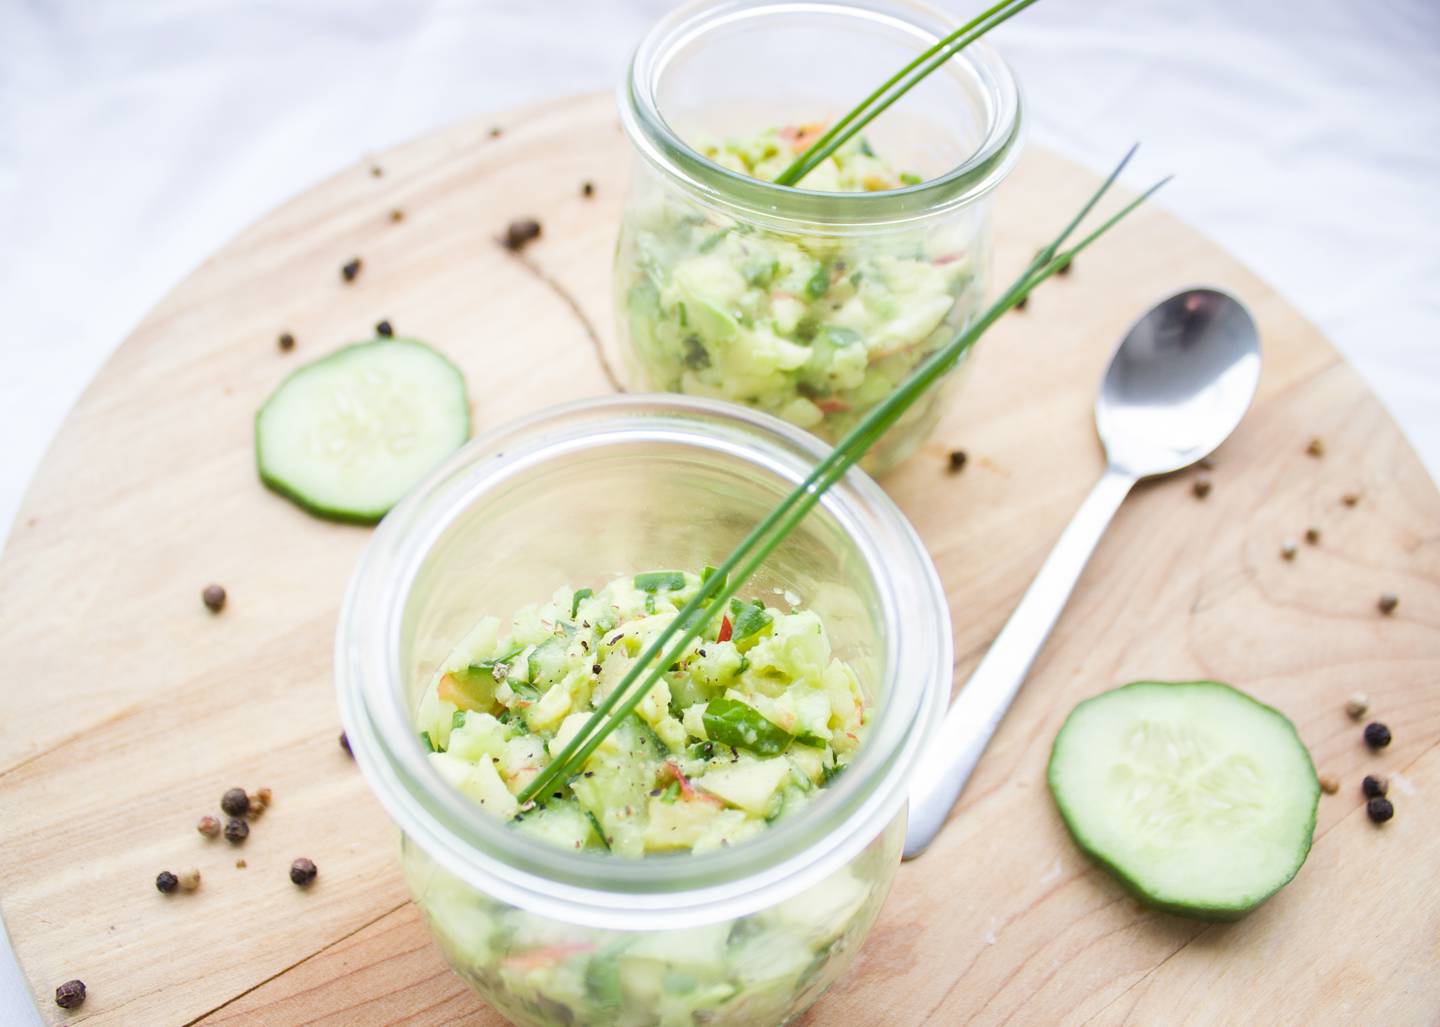 Water-rich cucumber and good fat avocados are essential for oily skin types. Photo: Pixabay